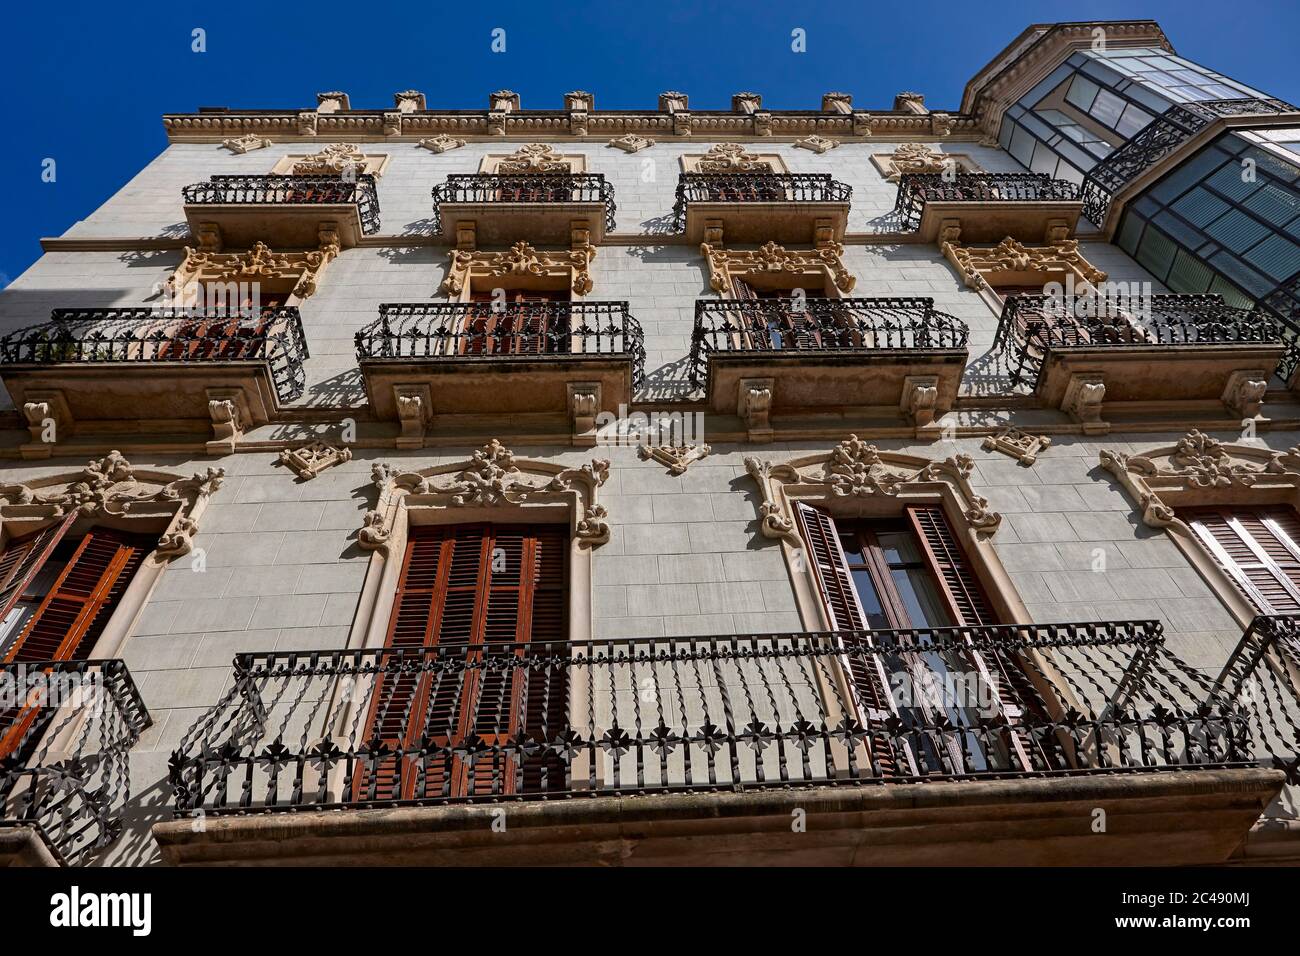 Balconies with elaborate wrought-iron fencing on the old residential multi-storey building in Reus, Catalonia, Spain. Stock Photo